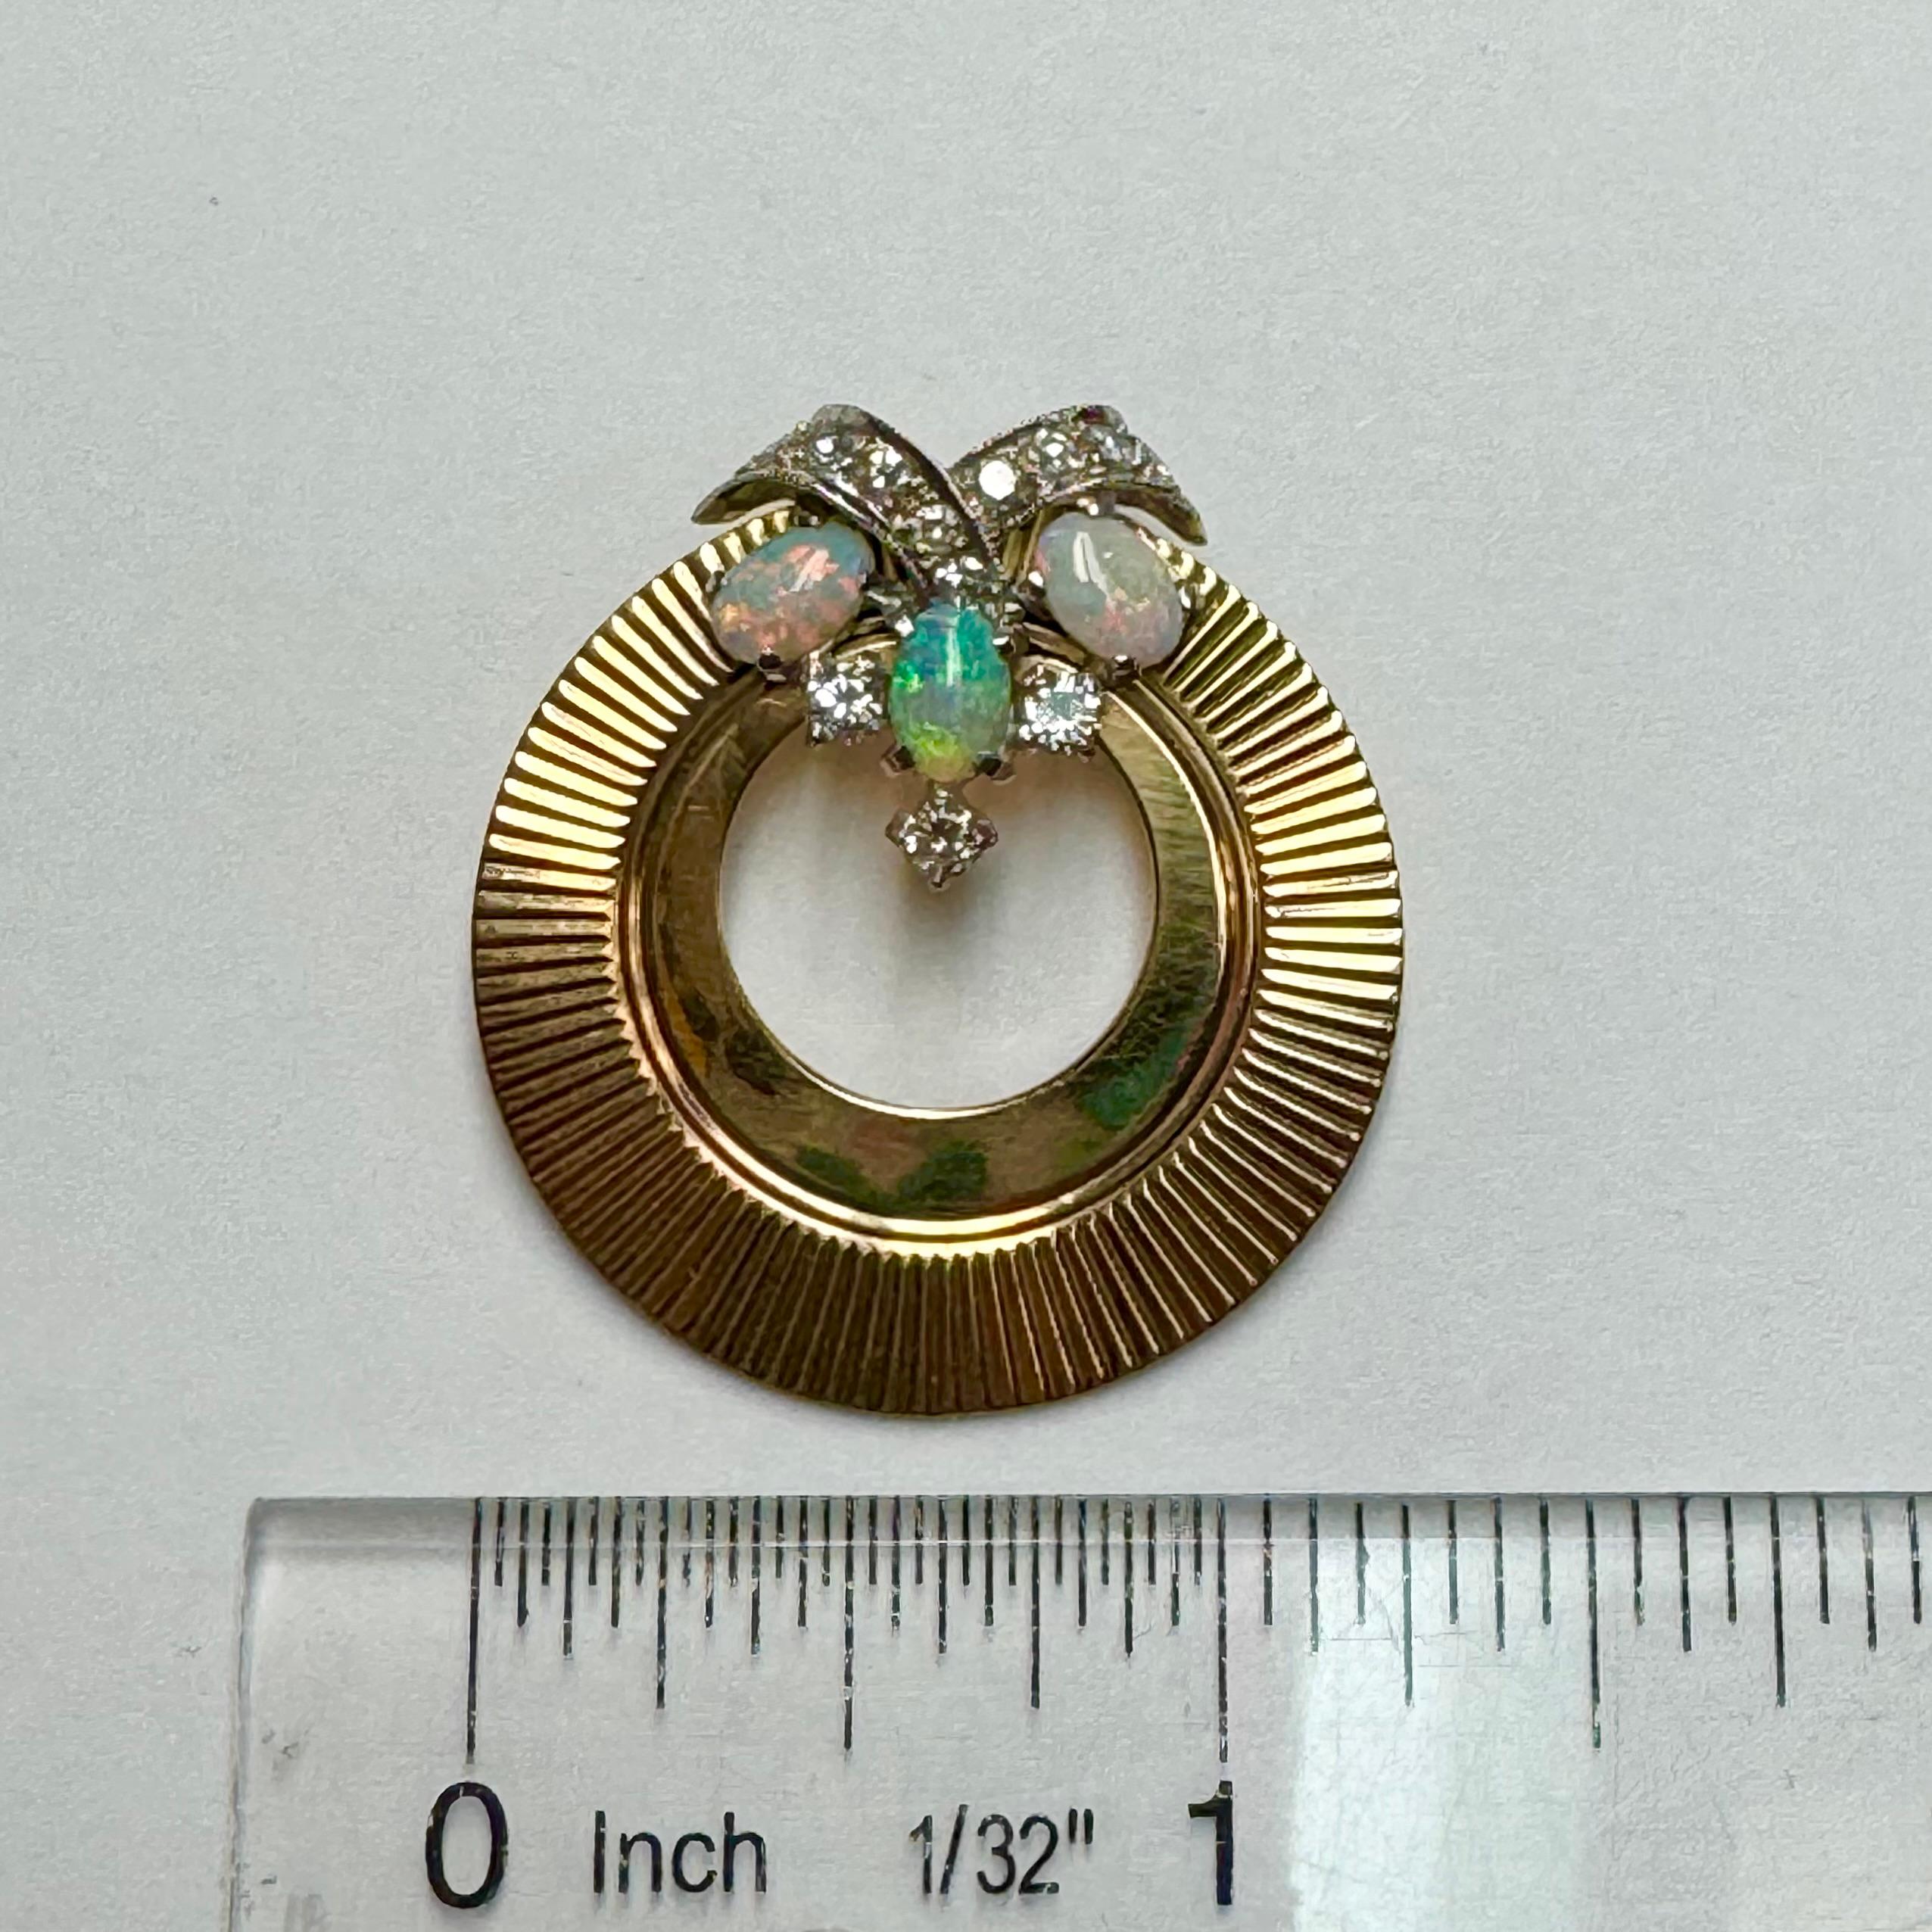 Gorgeous , one of a kind opal diamond pendant in 14k yellow and white gold. The pendant is created from a fluted golden disc, with the top adorned with 3 fiery opals and 11 round brilliant diamonds. This unique design is both bold and simple as